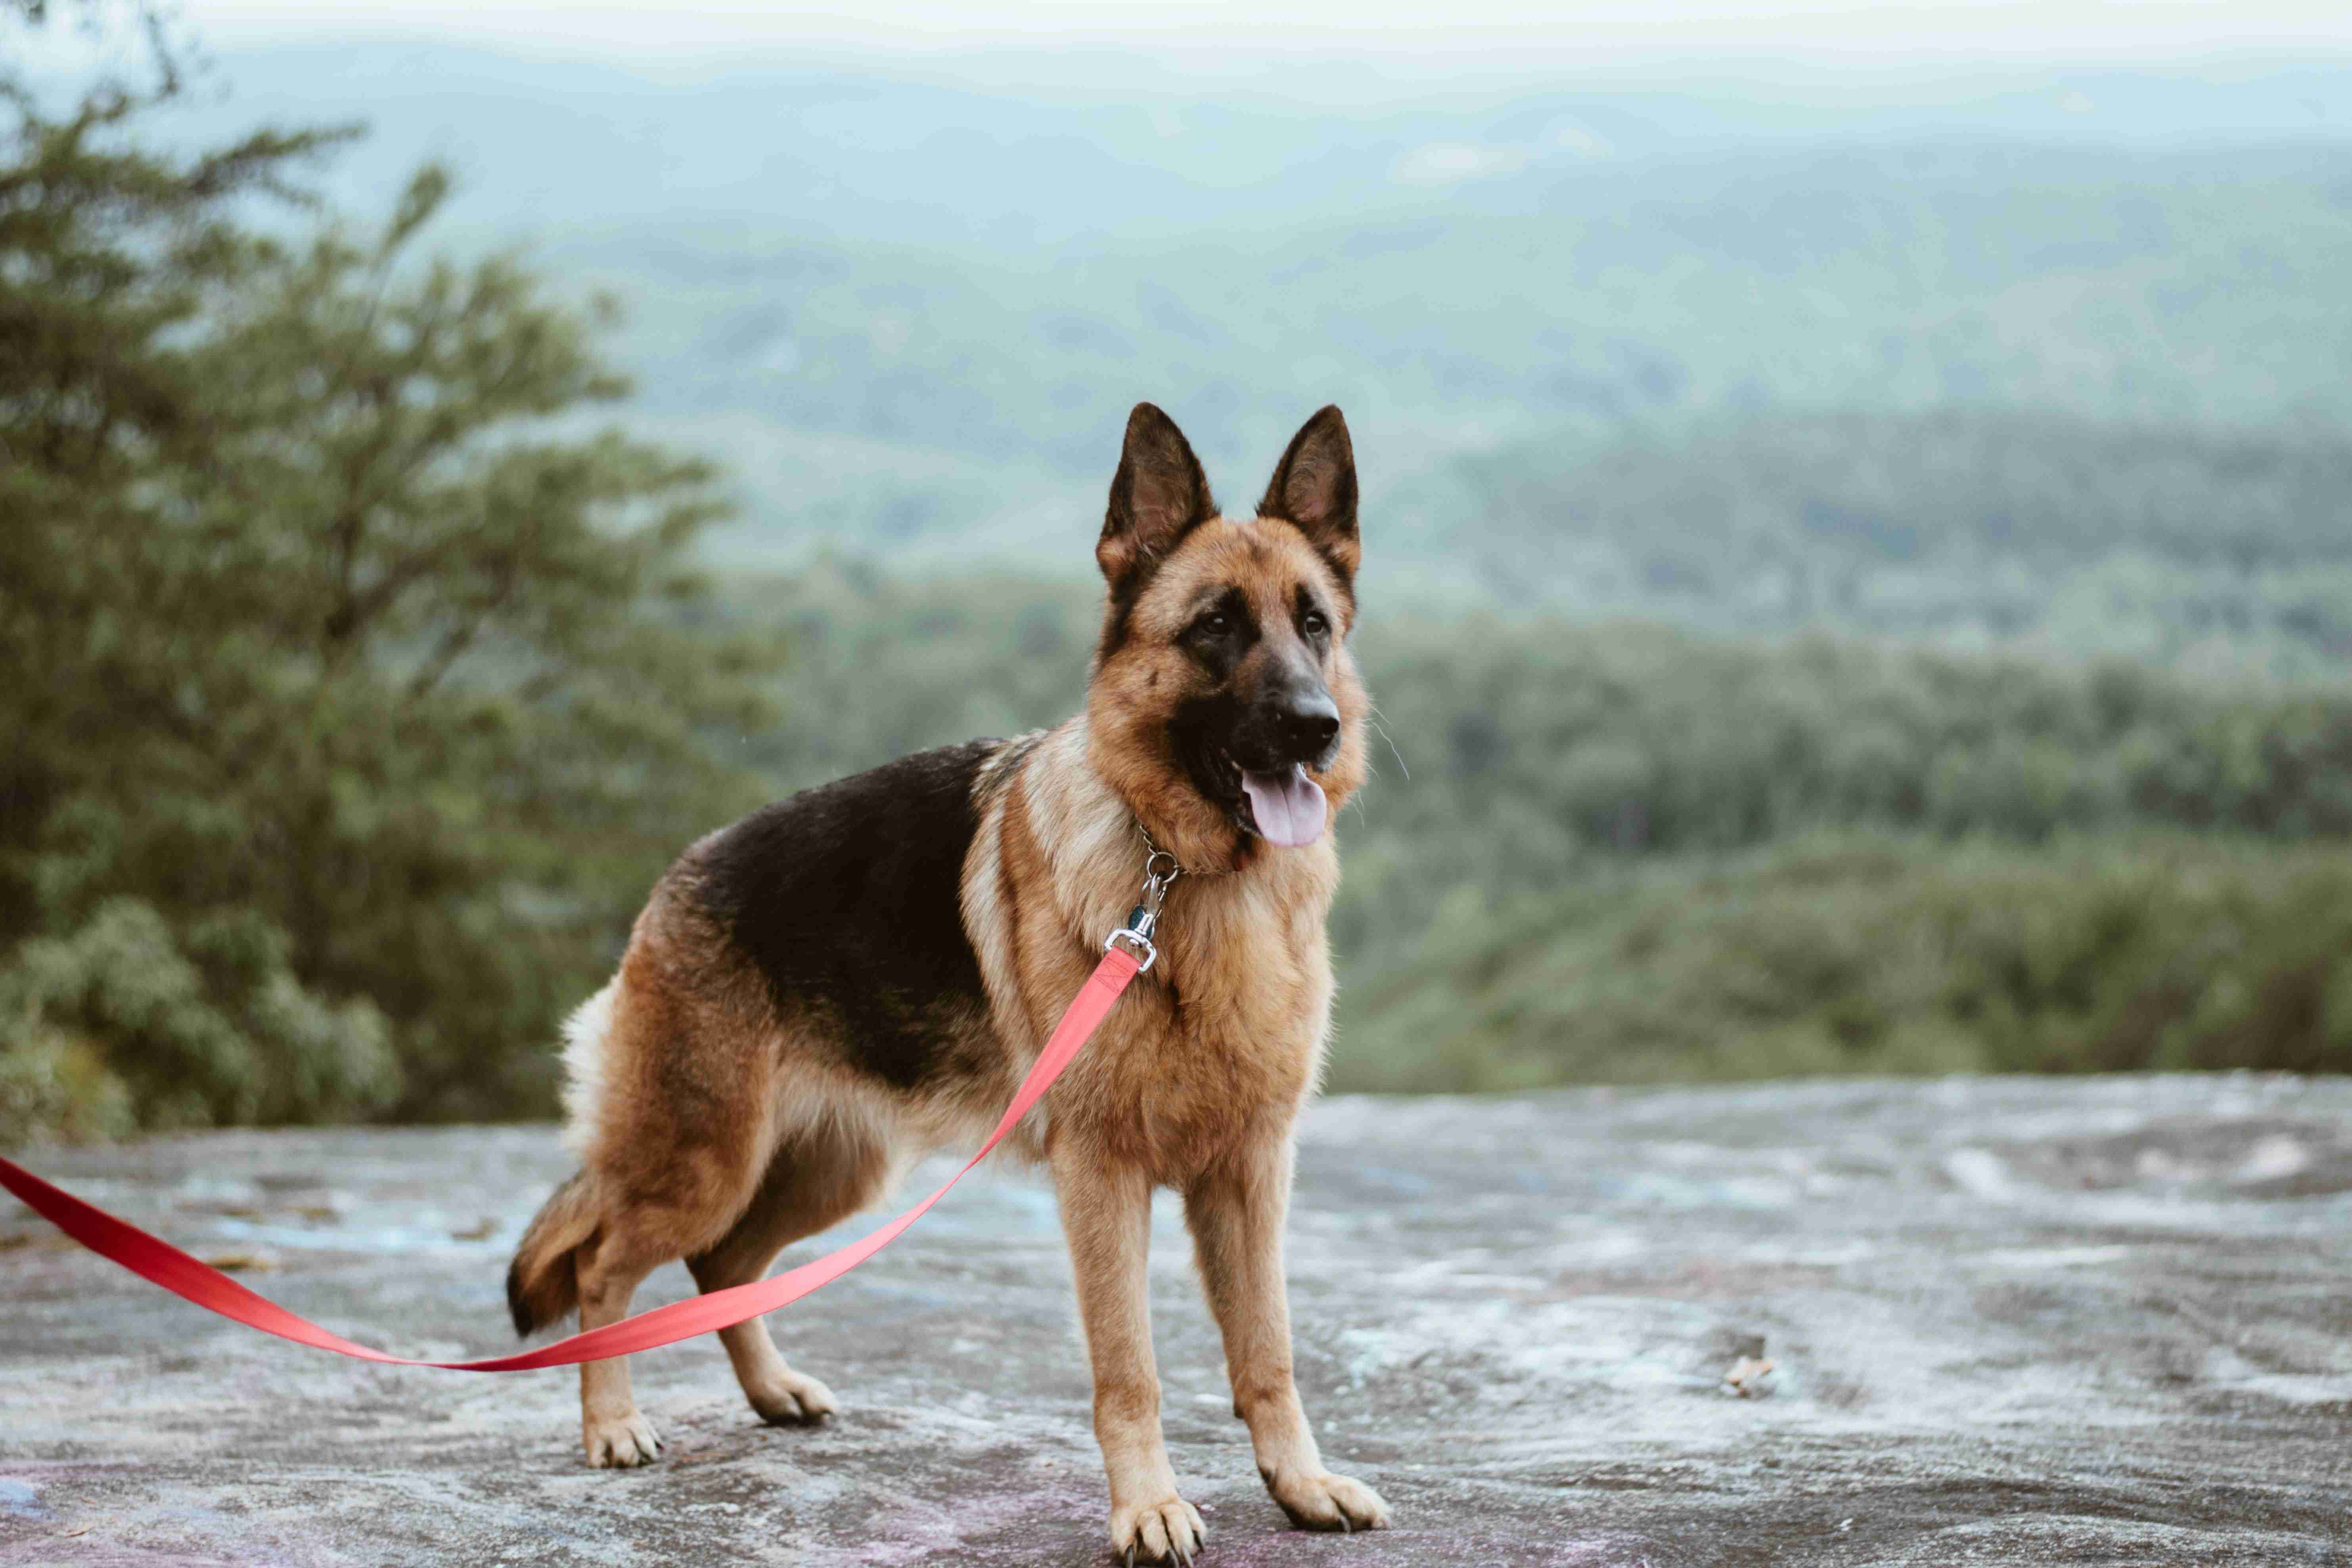 Can German shepherds be trained to become guide dogs for the blind?